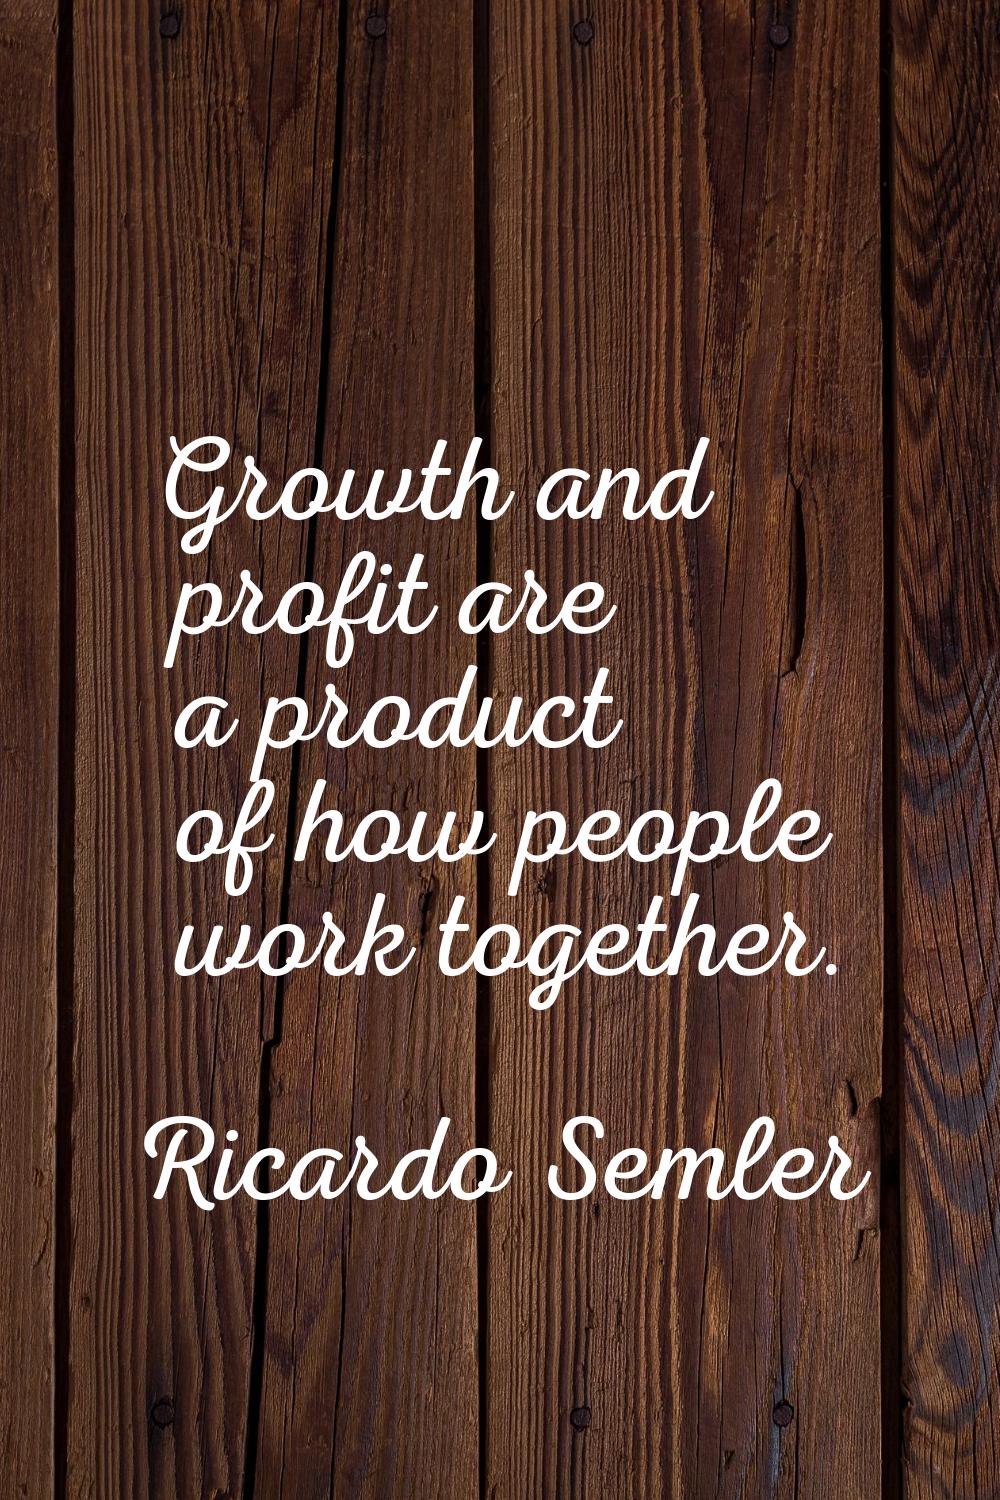 Growth and profit are a product of how people work together.